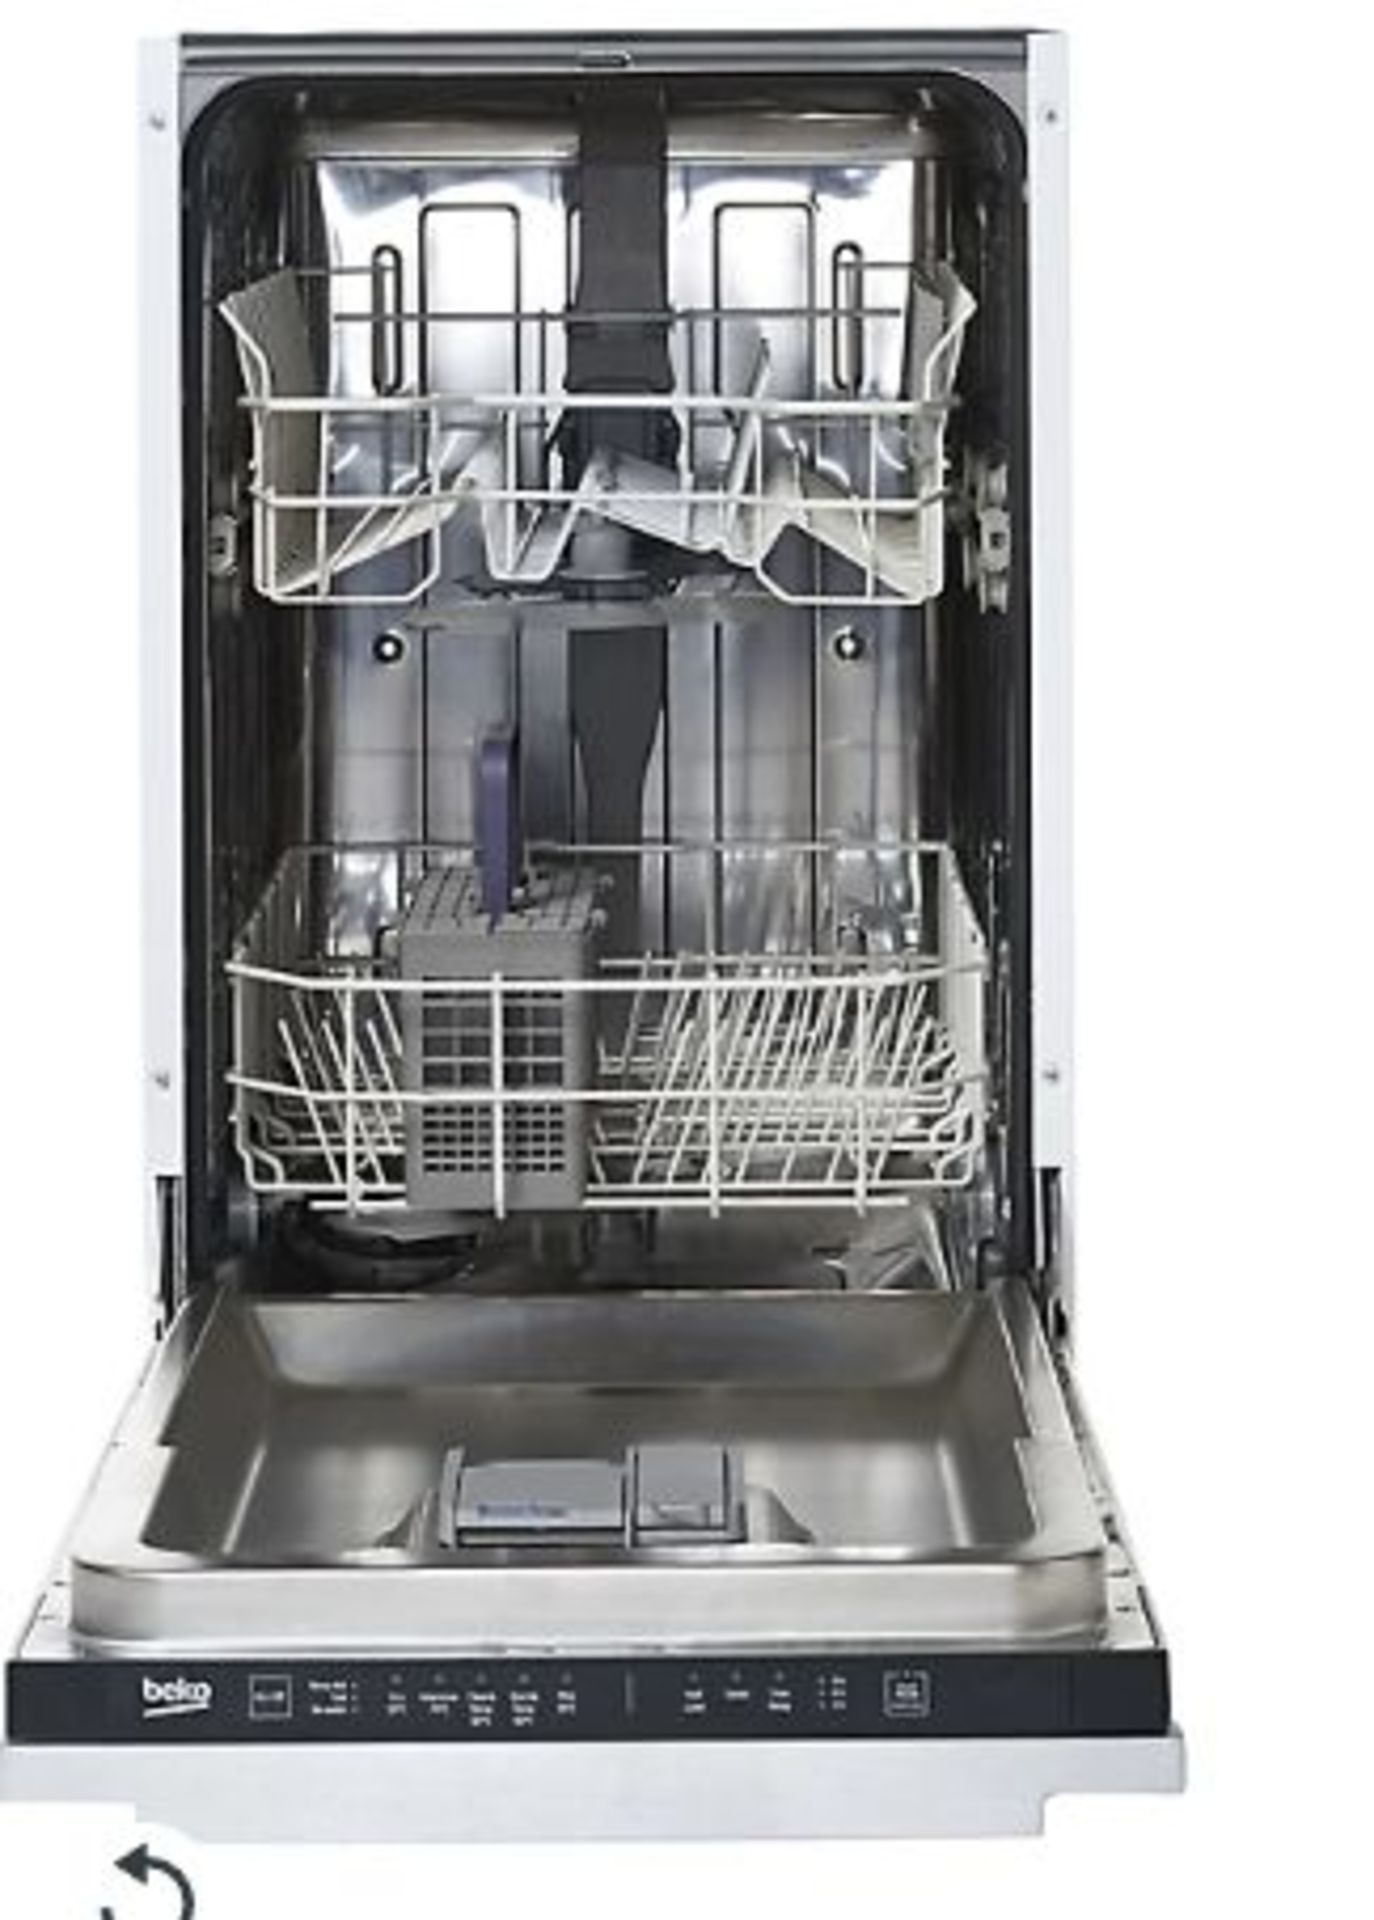 Beko DIS15Q10 Integrated Slimline Dishwasher - Black & white. - S2. RRP £439.00. Great for when - Image 2 of 2